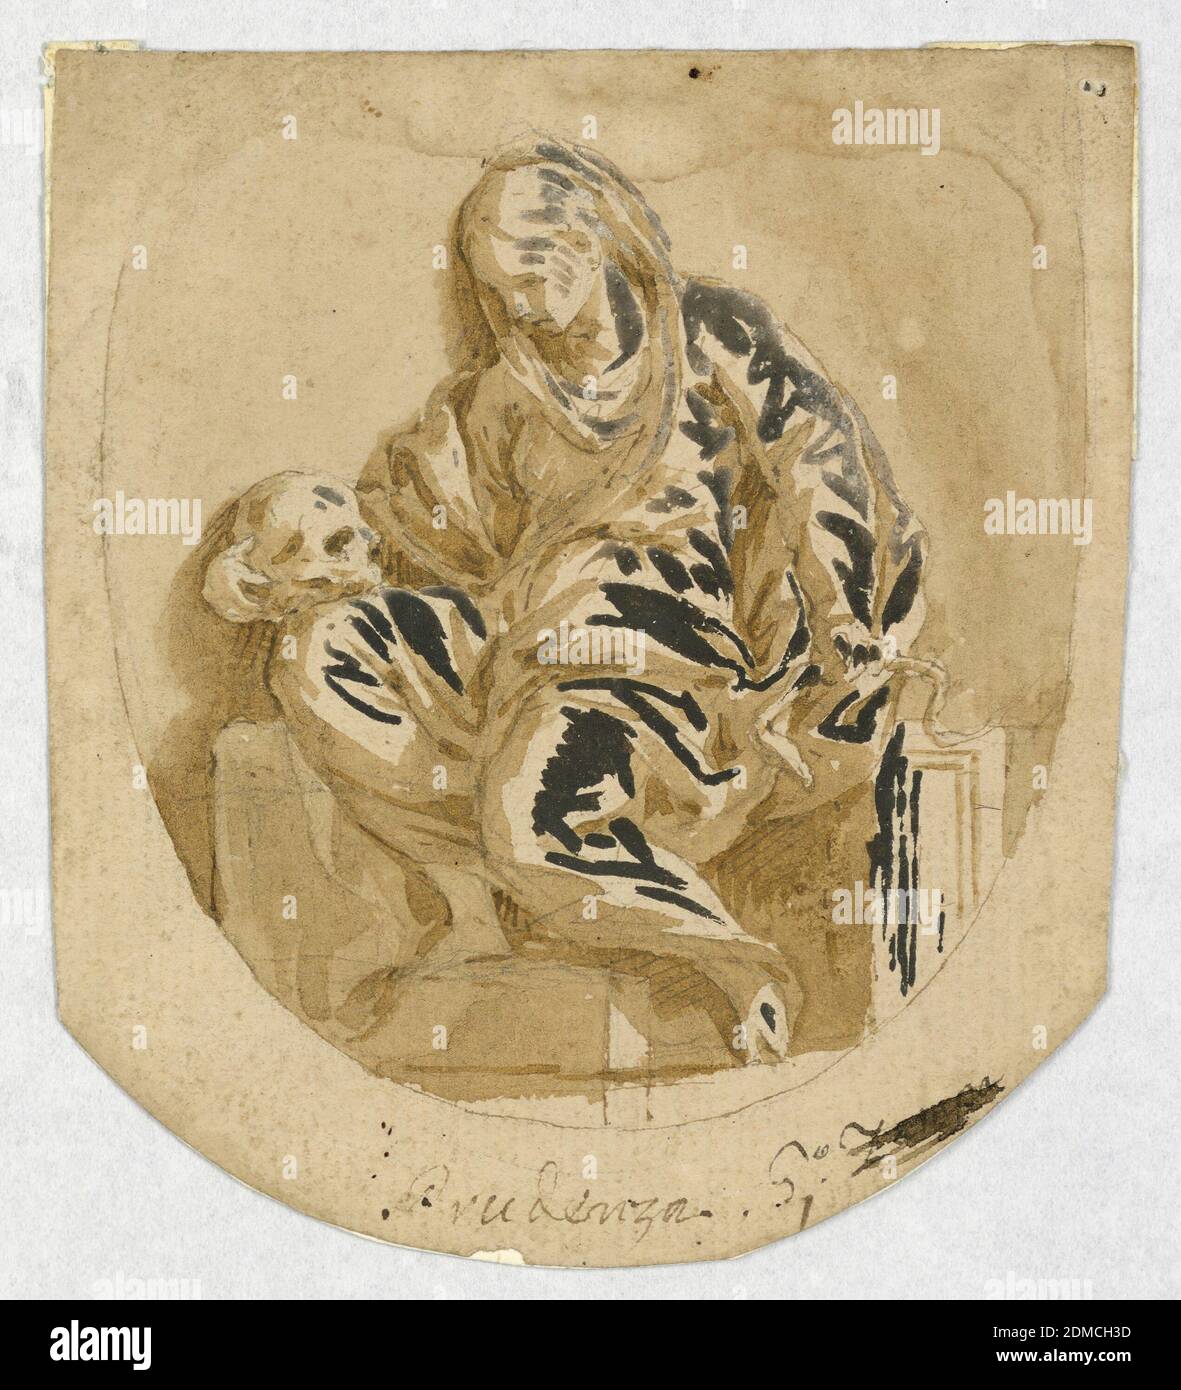 Design for an Ovoidal Painting: Prudence, Giacomo Zampa, Italian, 1731 - 1808, Black chalk, pen and ink, brush and sepia wash, brush and white oxidized gouache on brown paper, A seated woman contemplates a skull she holds in upon her right knee. The left hand holds a snail. Most of the entire ovoid is shown. Caption: 'Prudenza'. On verso, opposite direction: a part of the left arm of the figure in 1931-65-51 and shadowing in red crayon., Forli, Italy, ca. 1780, Drawing Stock Photo